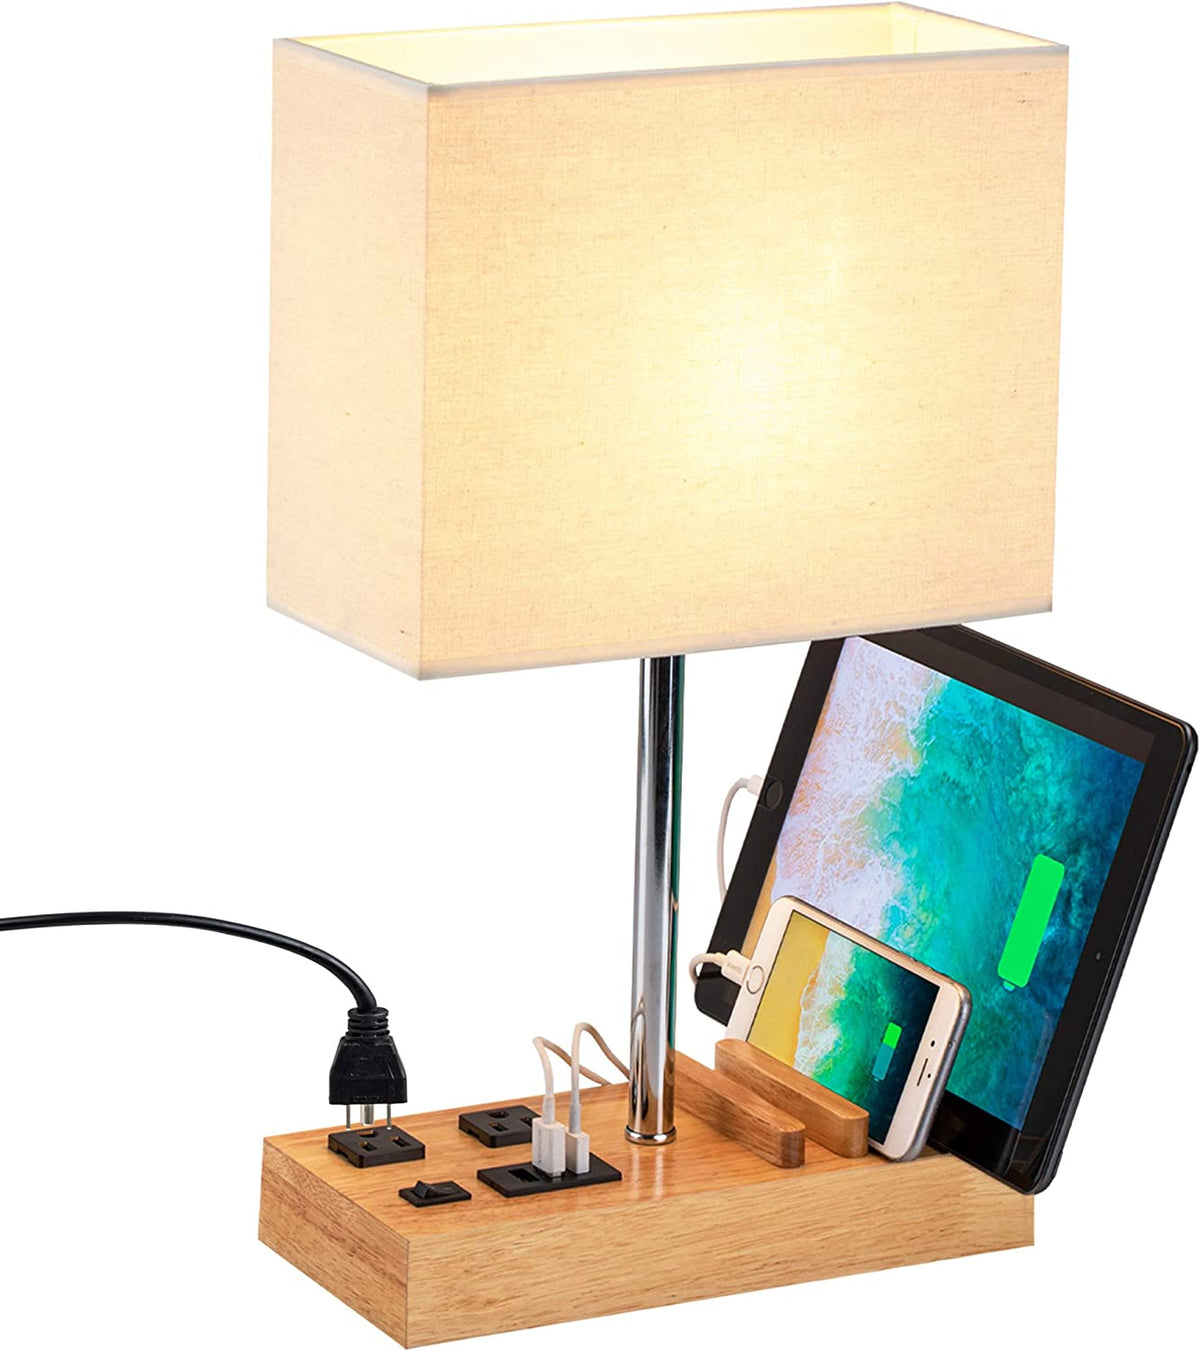 Desk Lamp with 3 USB Charging Ports, Table Lamp with 2AC Outlets and 3 Phone Stands, Nightstand Bedside Lamp with Natural Wooden Base and Cream Linen Shade